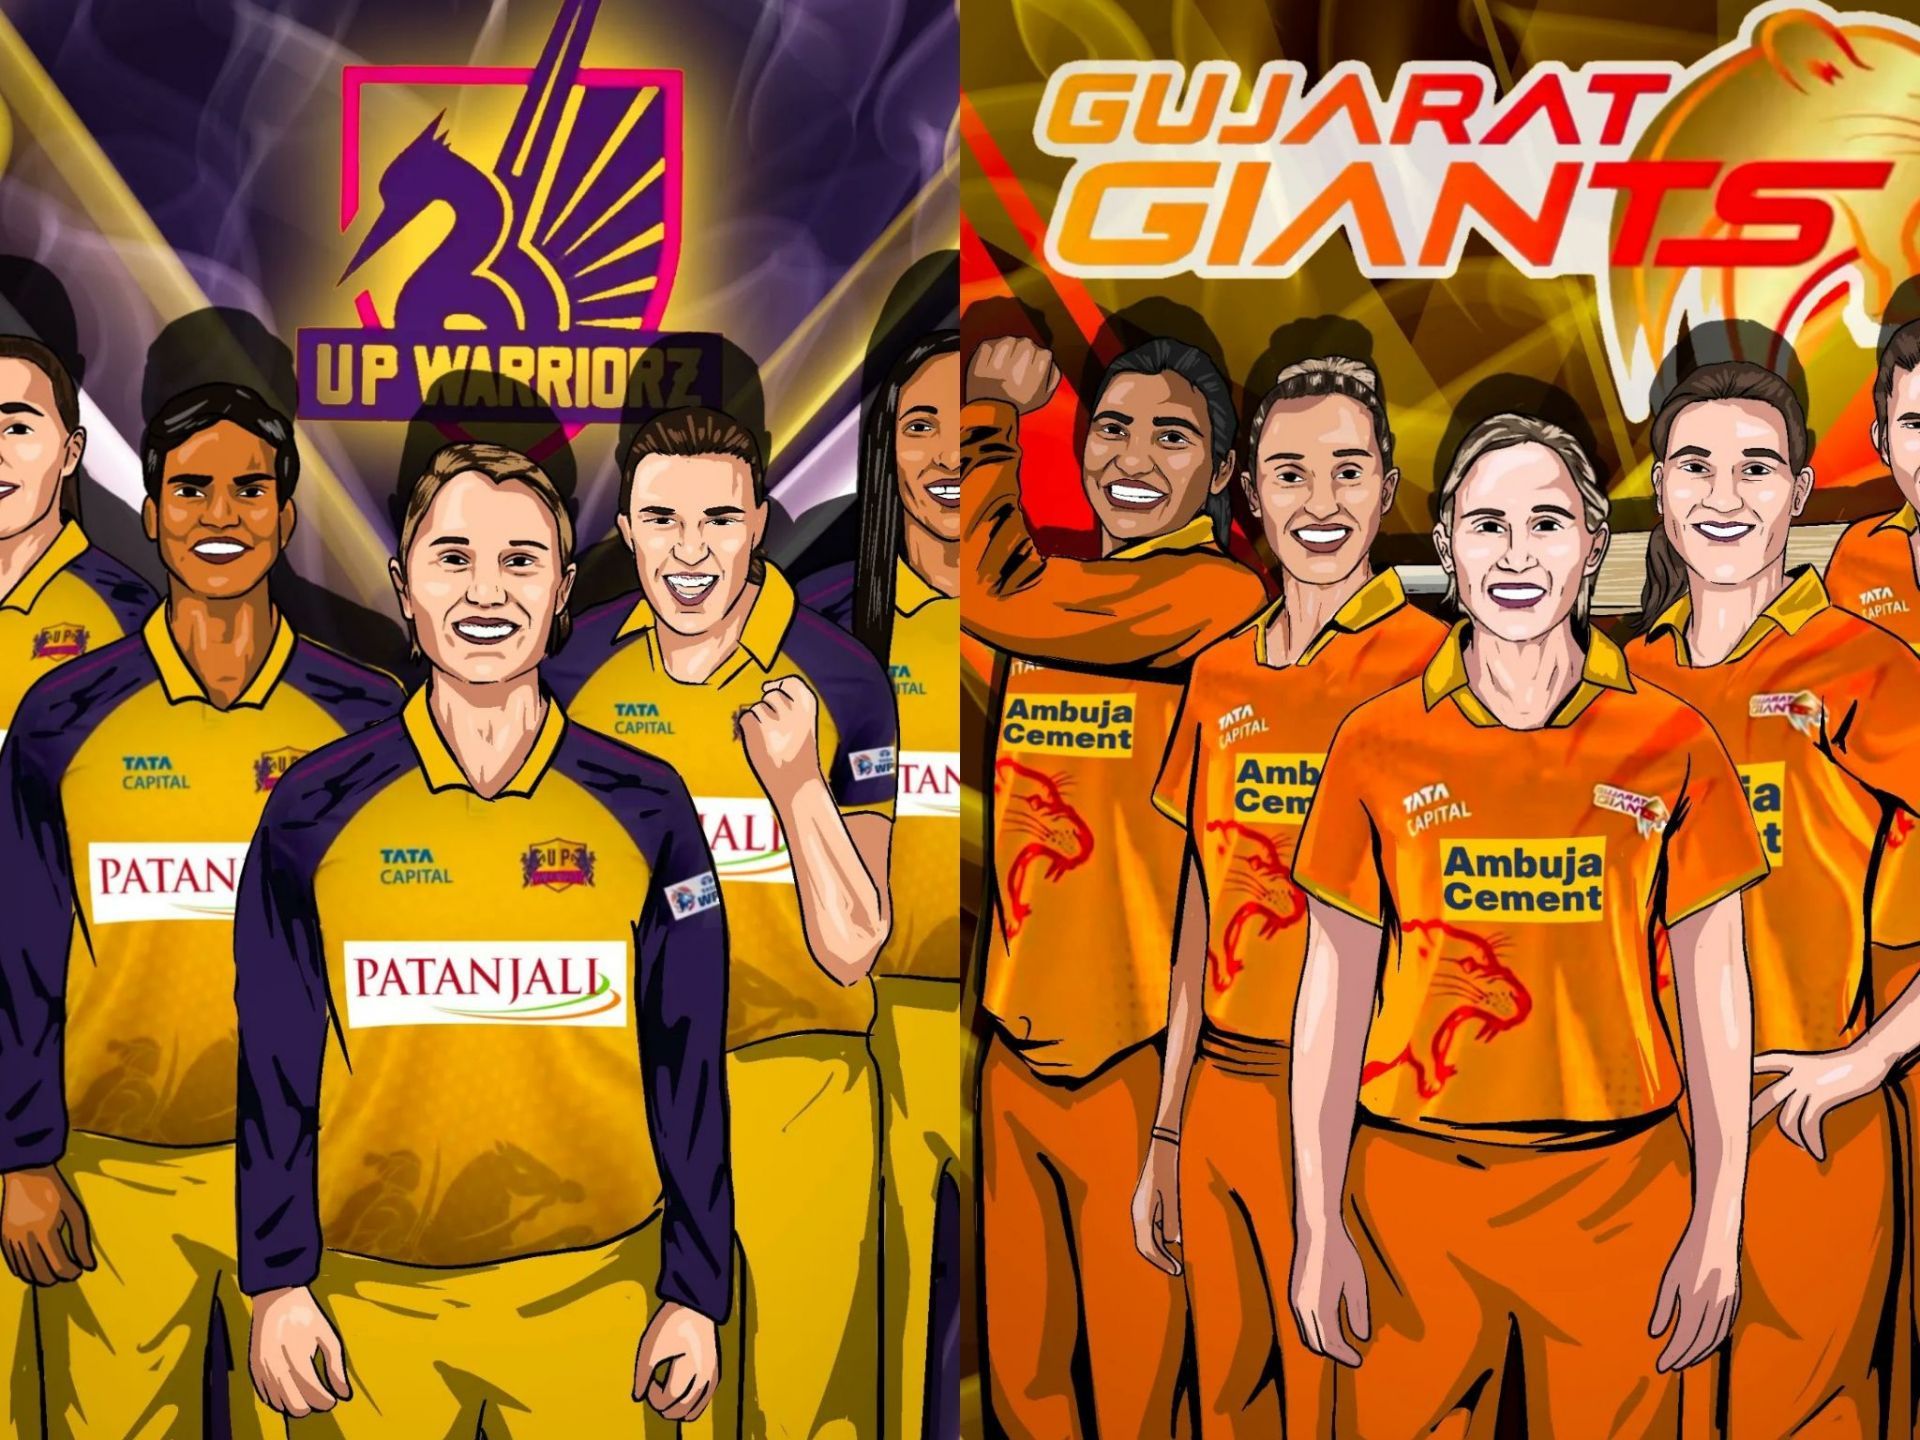 UP Warriorz are set to lock horns with Gujarat Giants in Match 3 of WPL 2022 [Pic Credit: Sportskeeda]